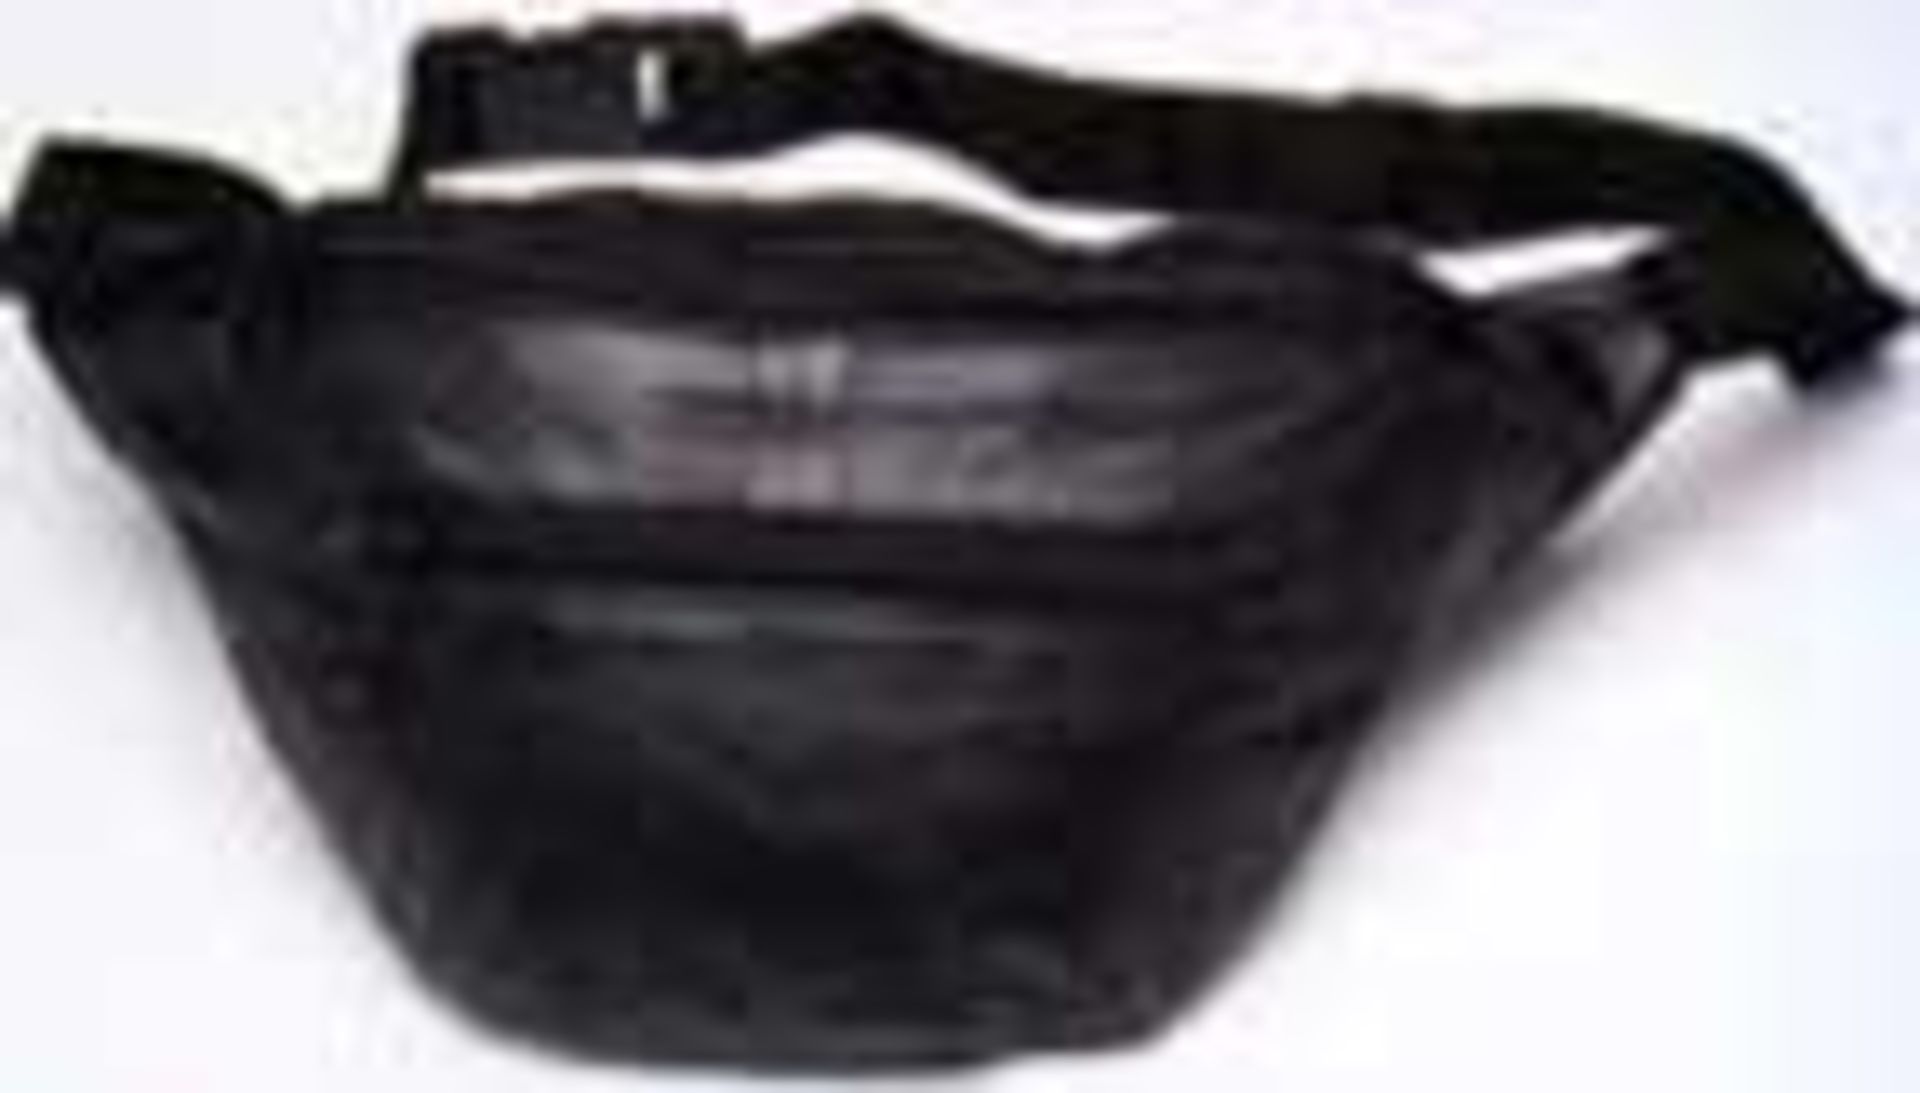 (40) Soft lambskin fanny pack with colorfast back (imitation leather). Top curved zipper opening,